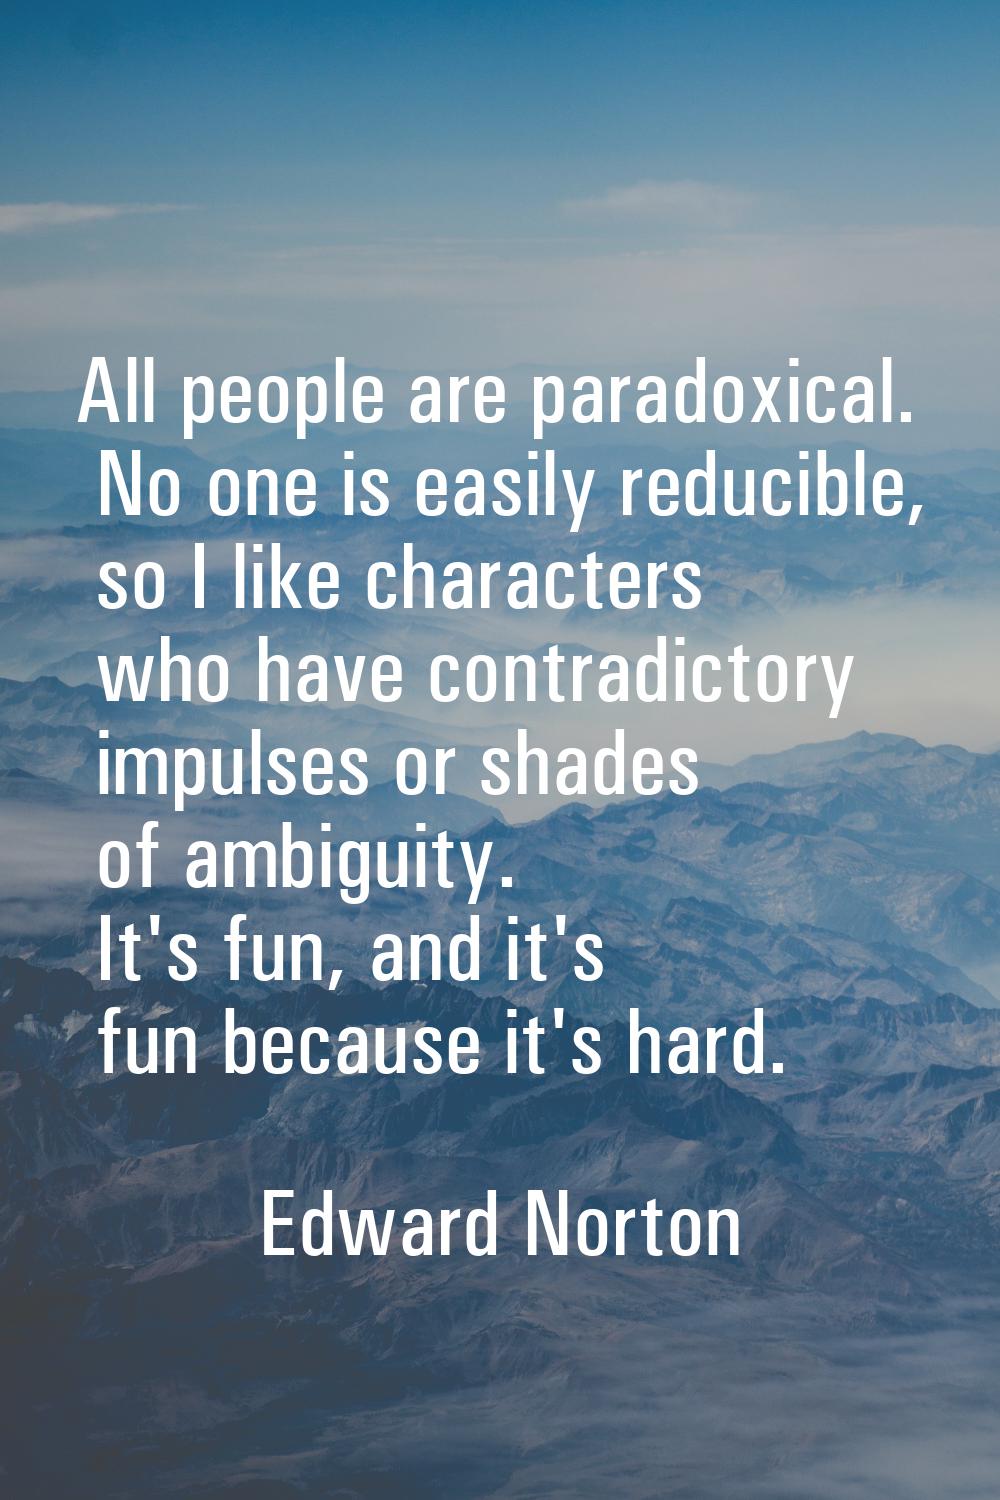 All people are paradoxical. No one is easily reducible, so I like characters who have contradictory